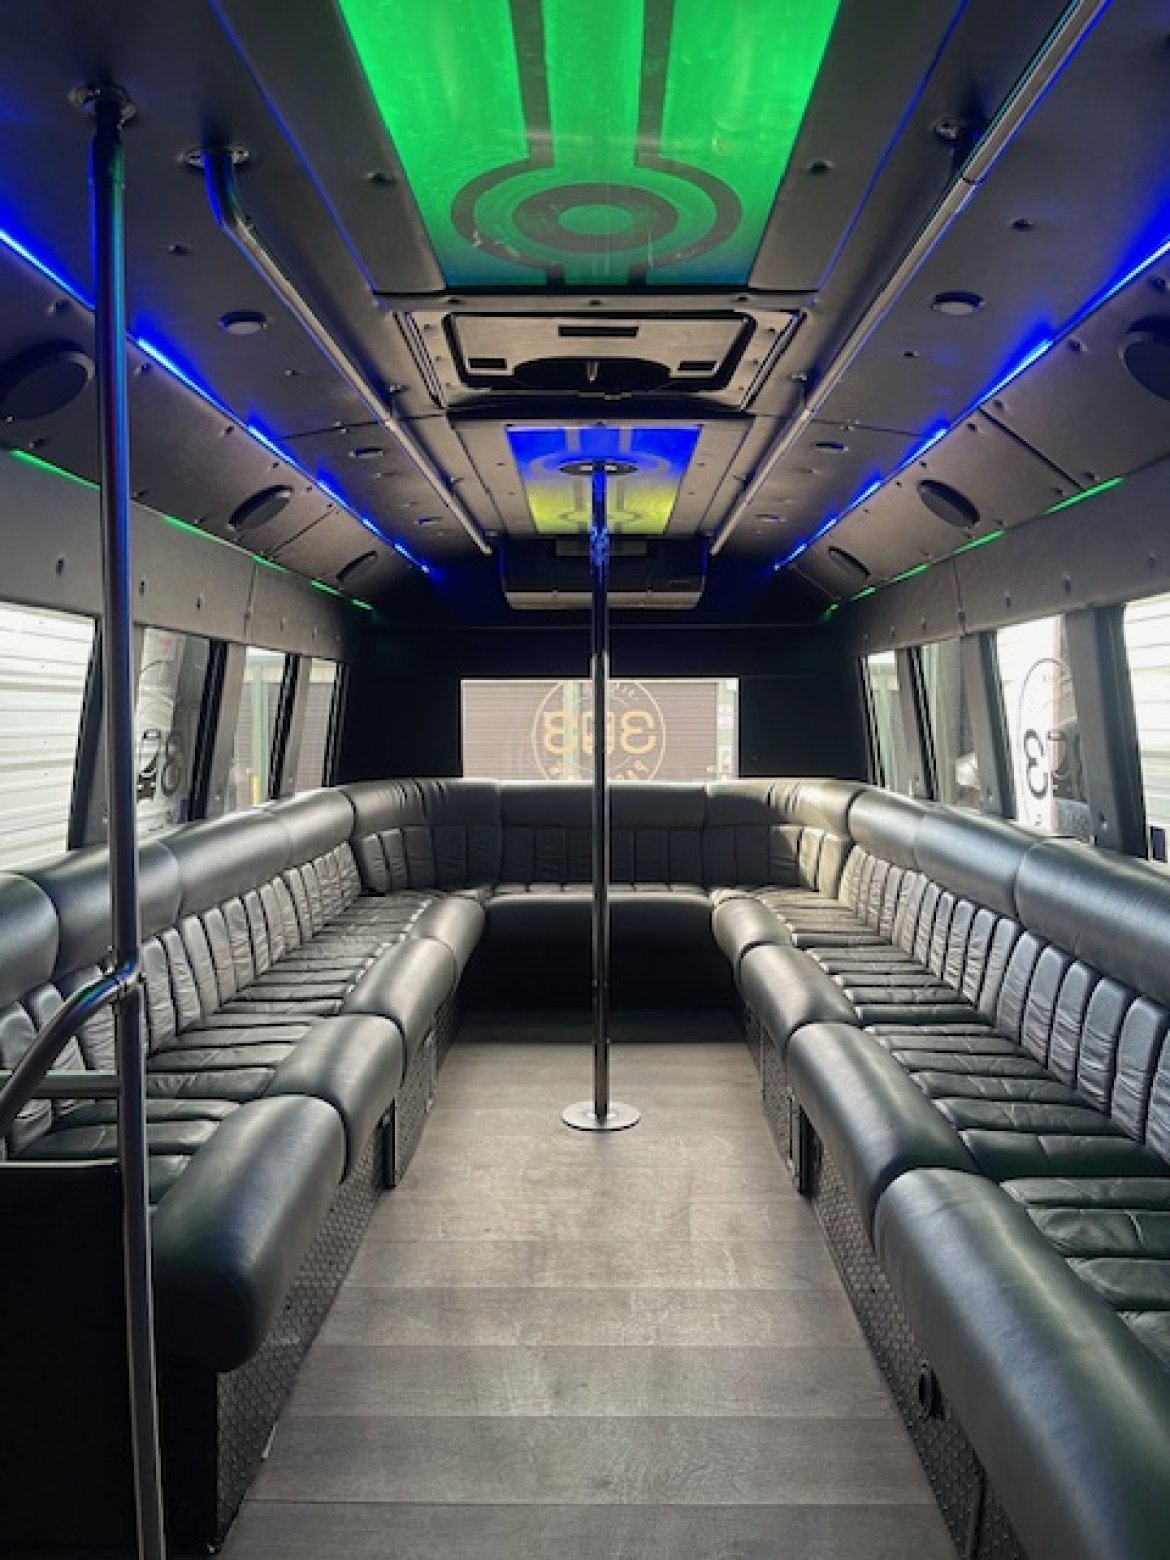 2010 Ford E-series Limo Bus